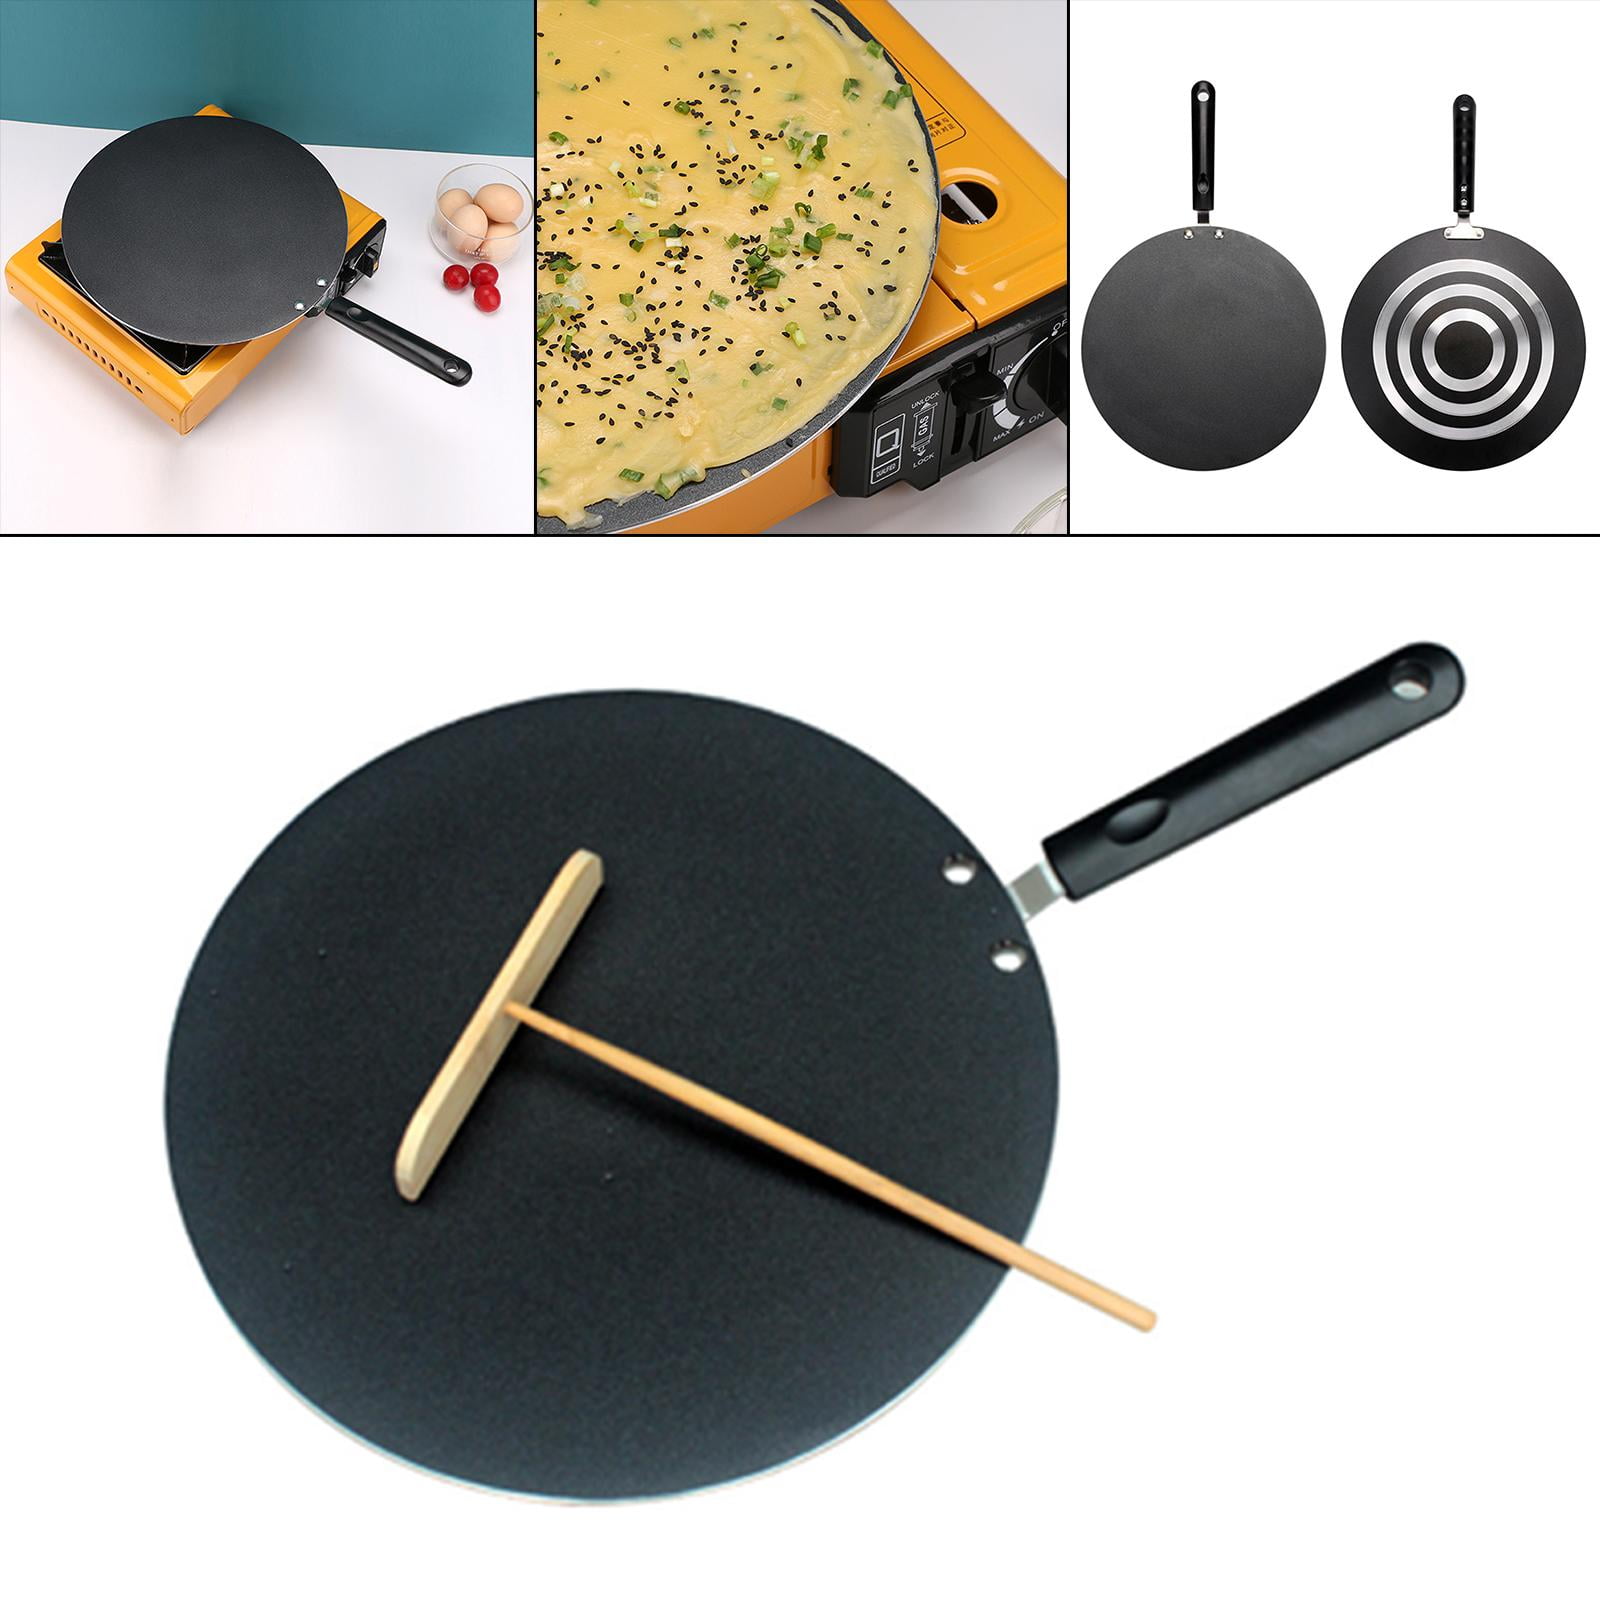 1 piece Pancake Round Griddle Tortilla Maker Flat Pan Classic for Home